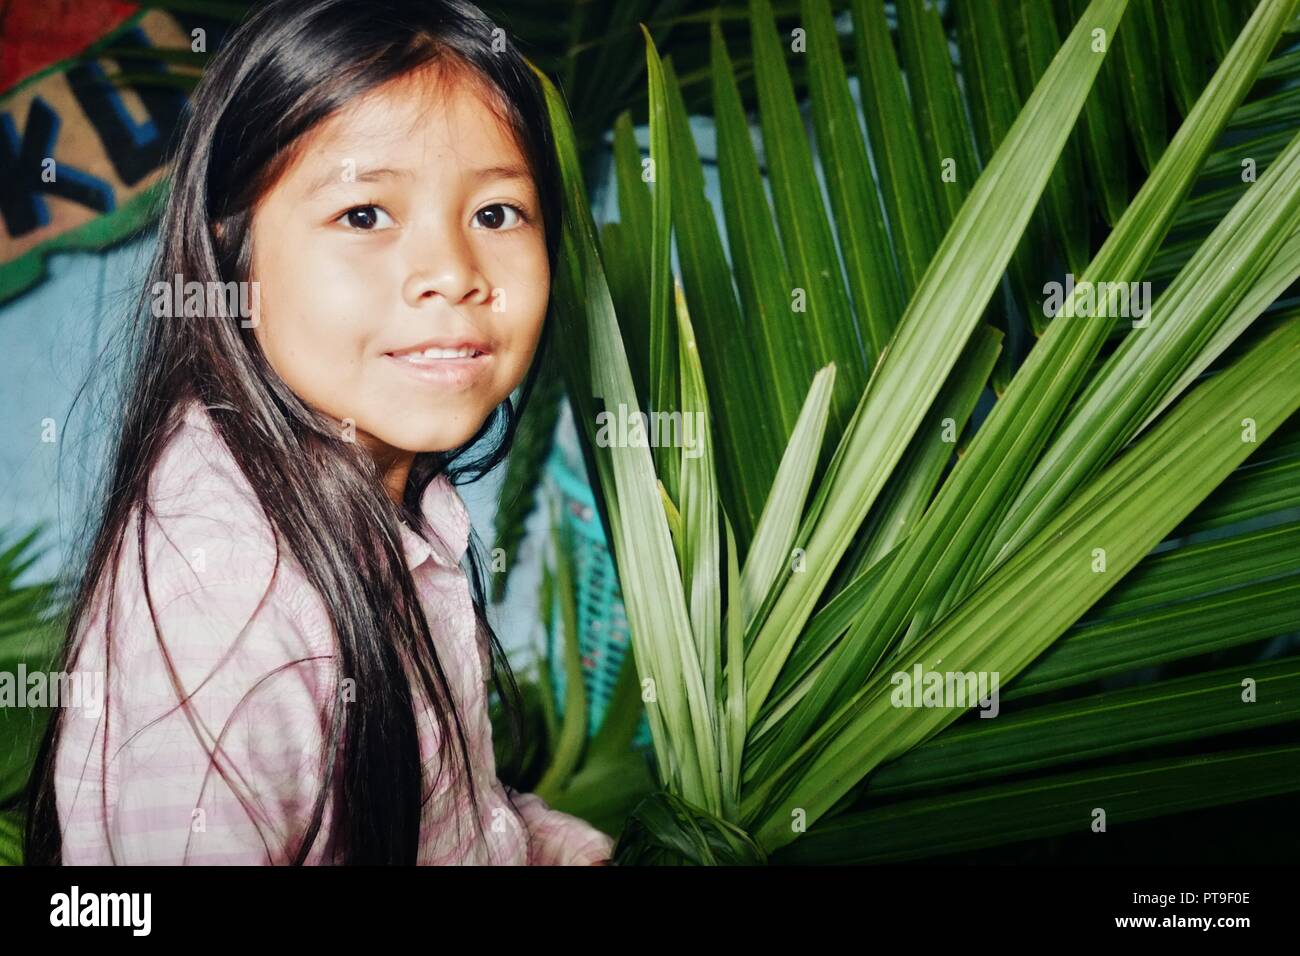 Macedonia, Amazonia / Colombia - MAR 15 2016: young girl preparing for a village event making palm leaf decoration Stock Photo